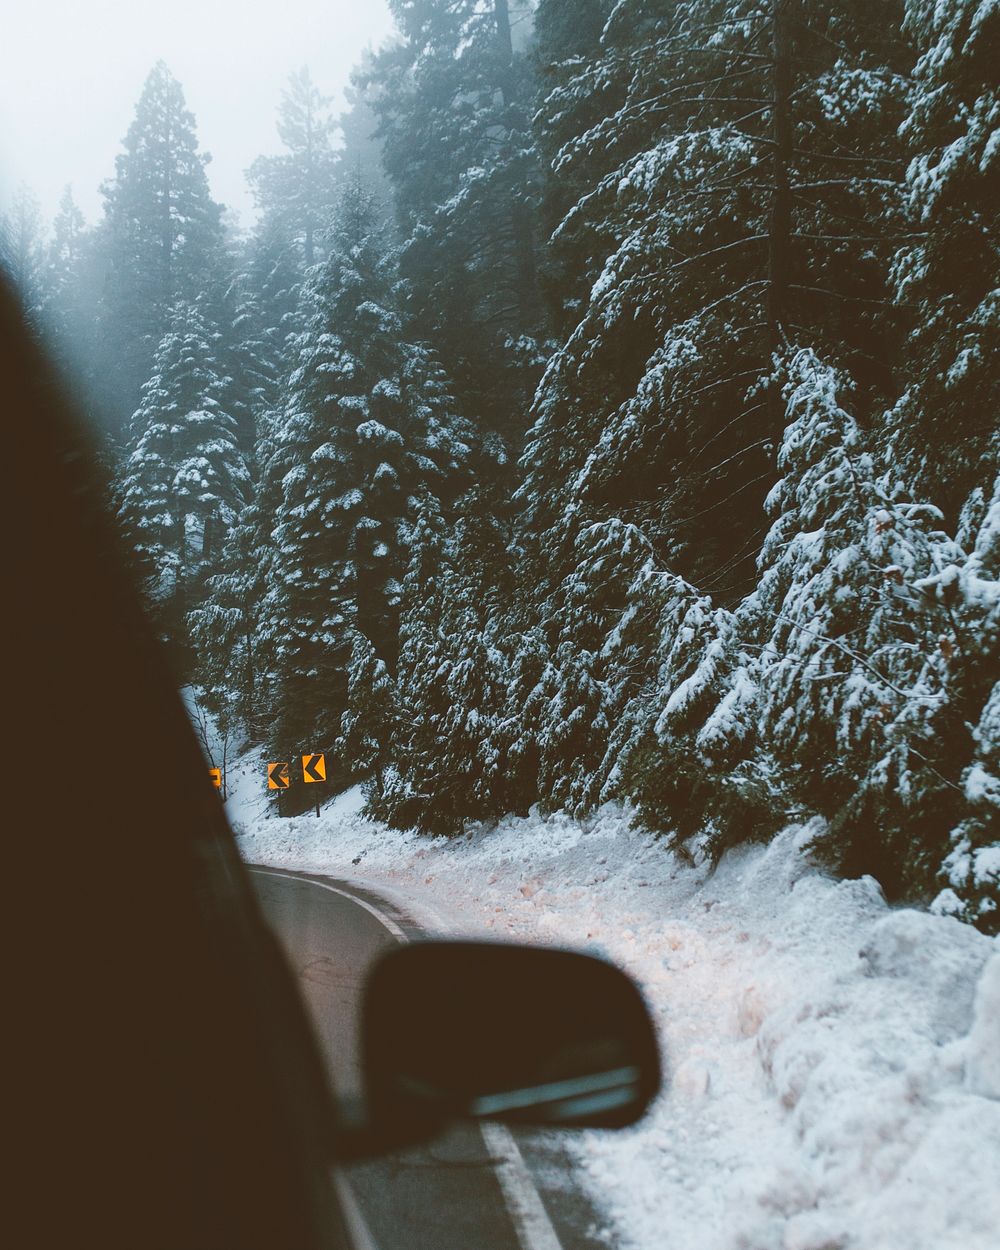 Driving around a turn on a forest road in the winter at Lake Arrowhead in California. Original public domain image from…